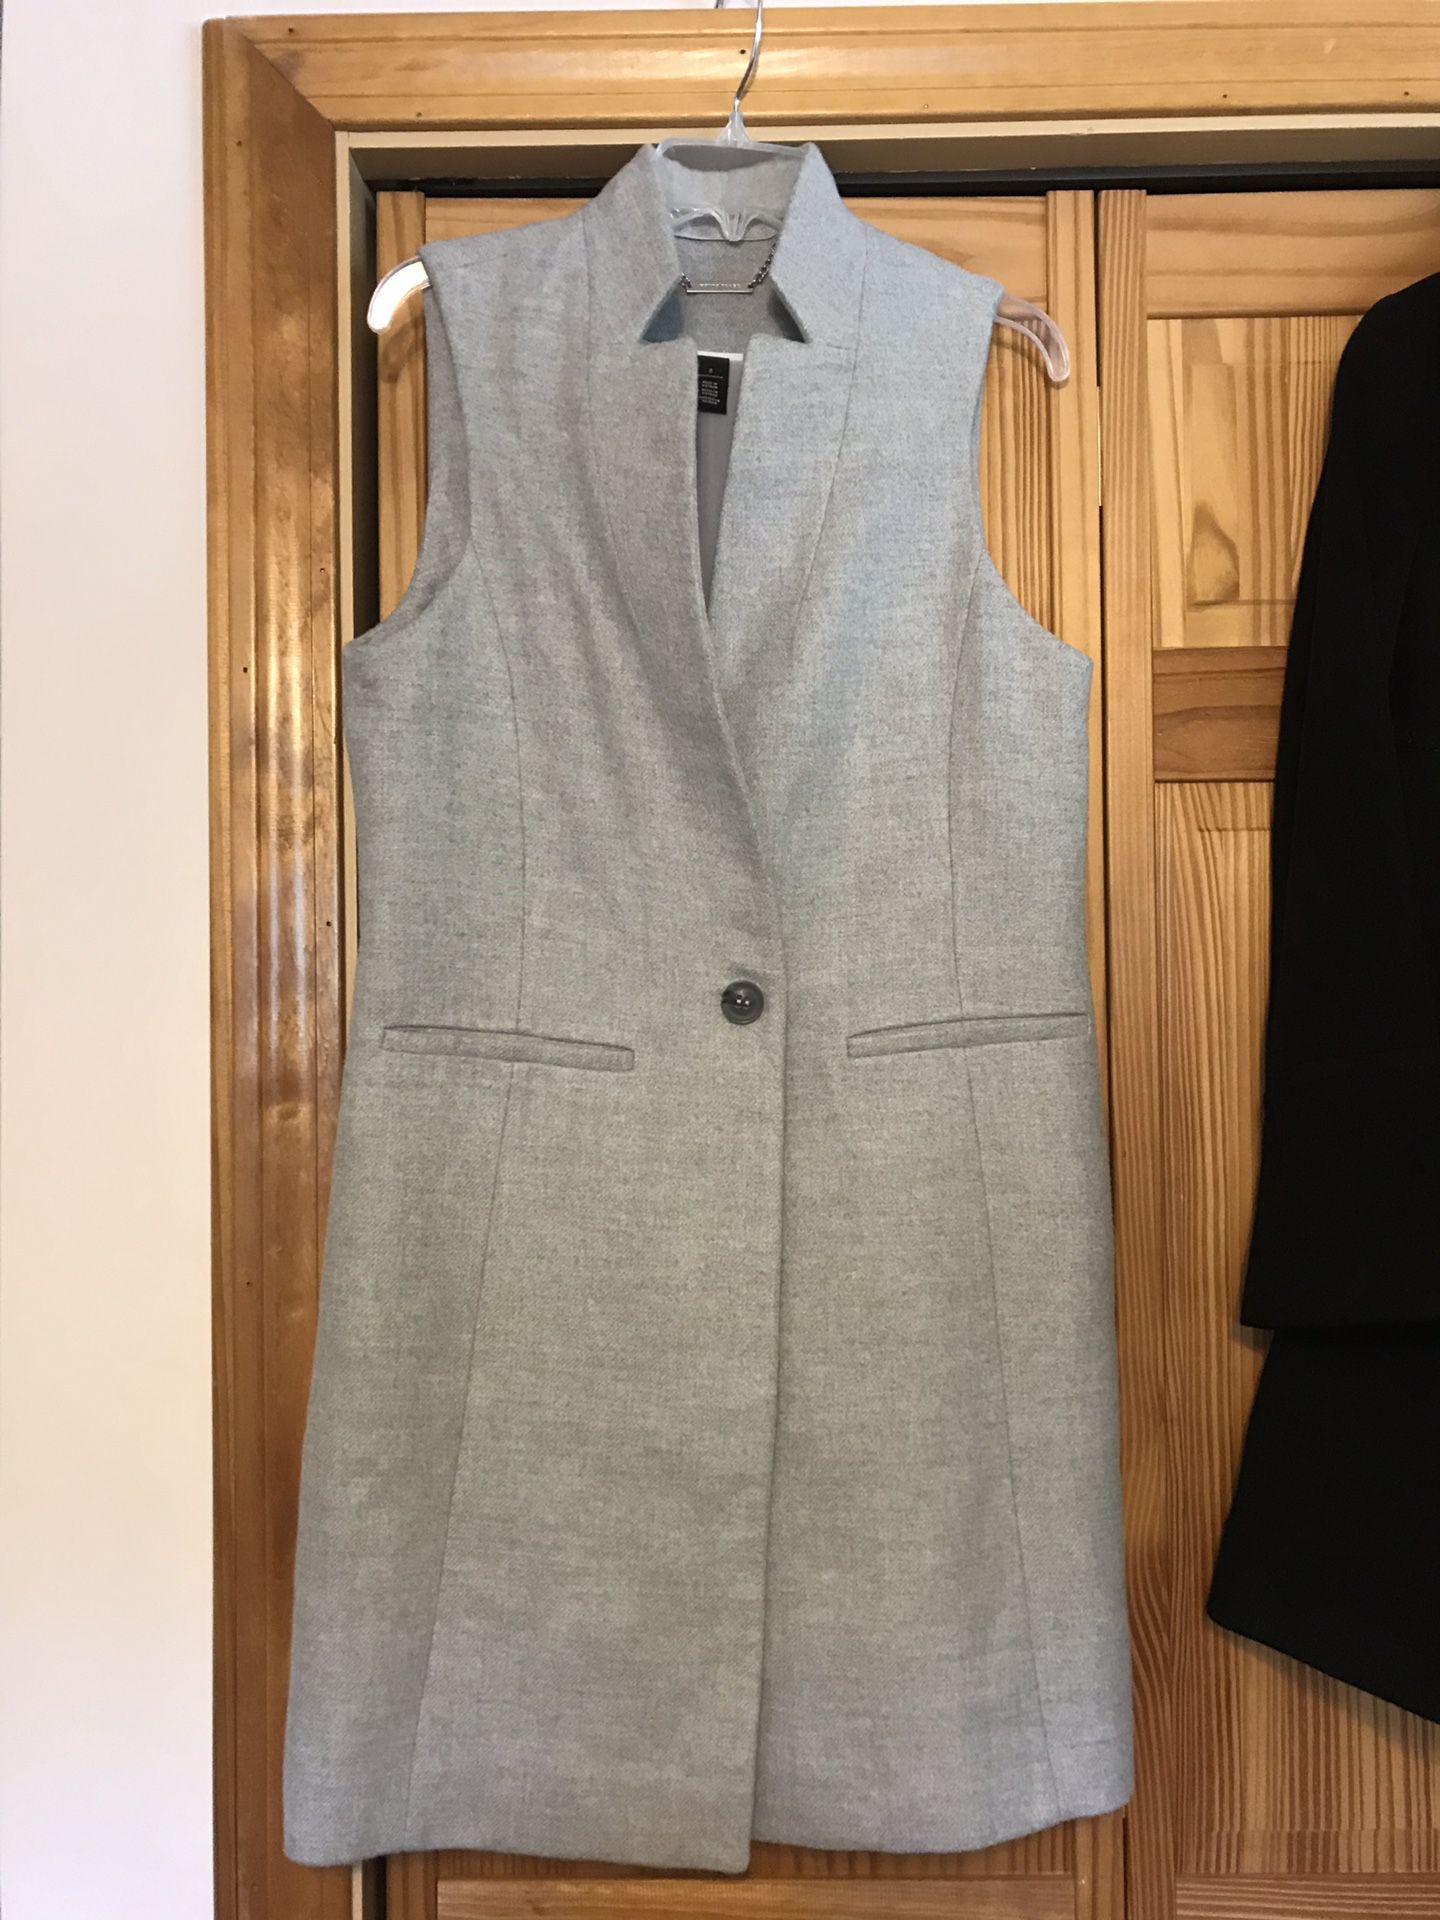 Dress wool lined. Made by White/Black